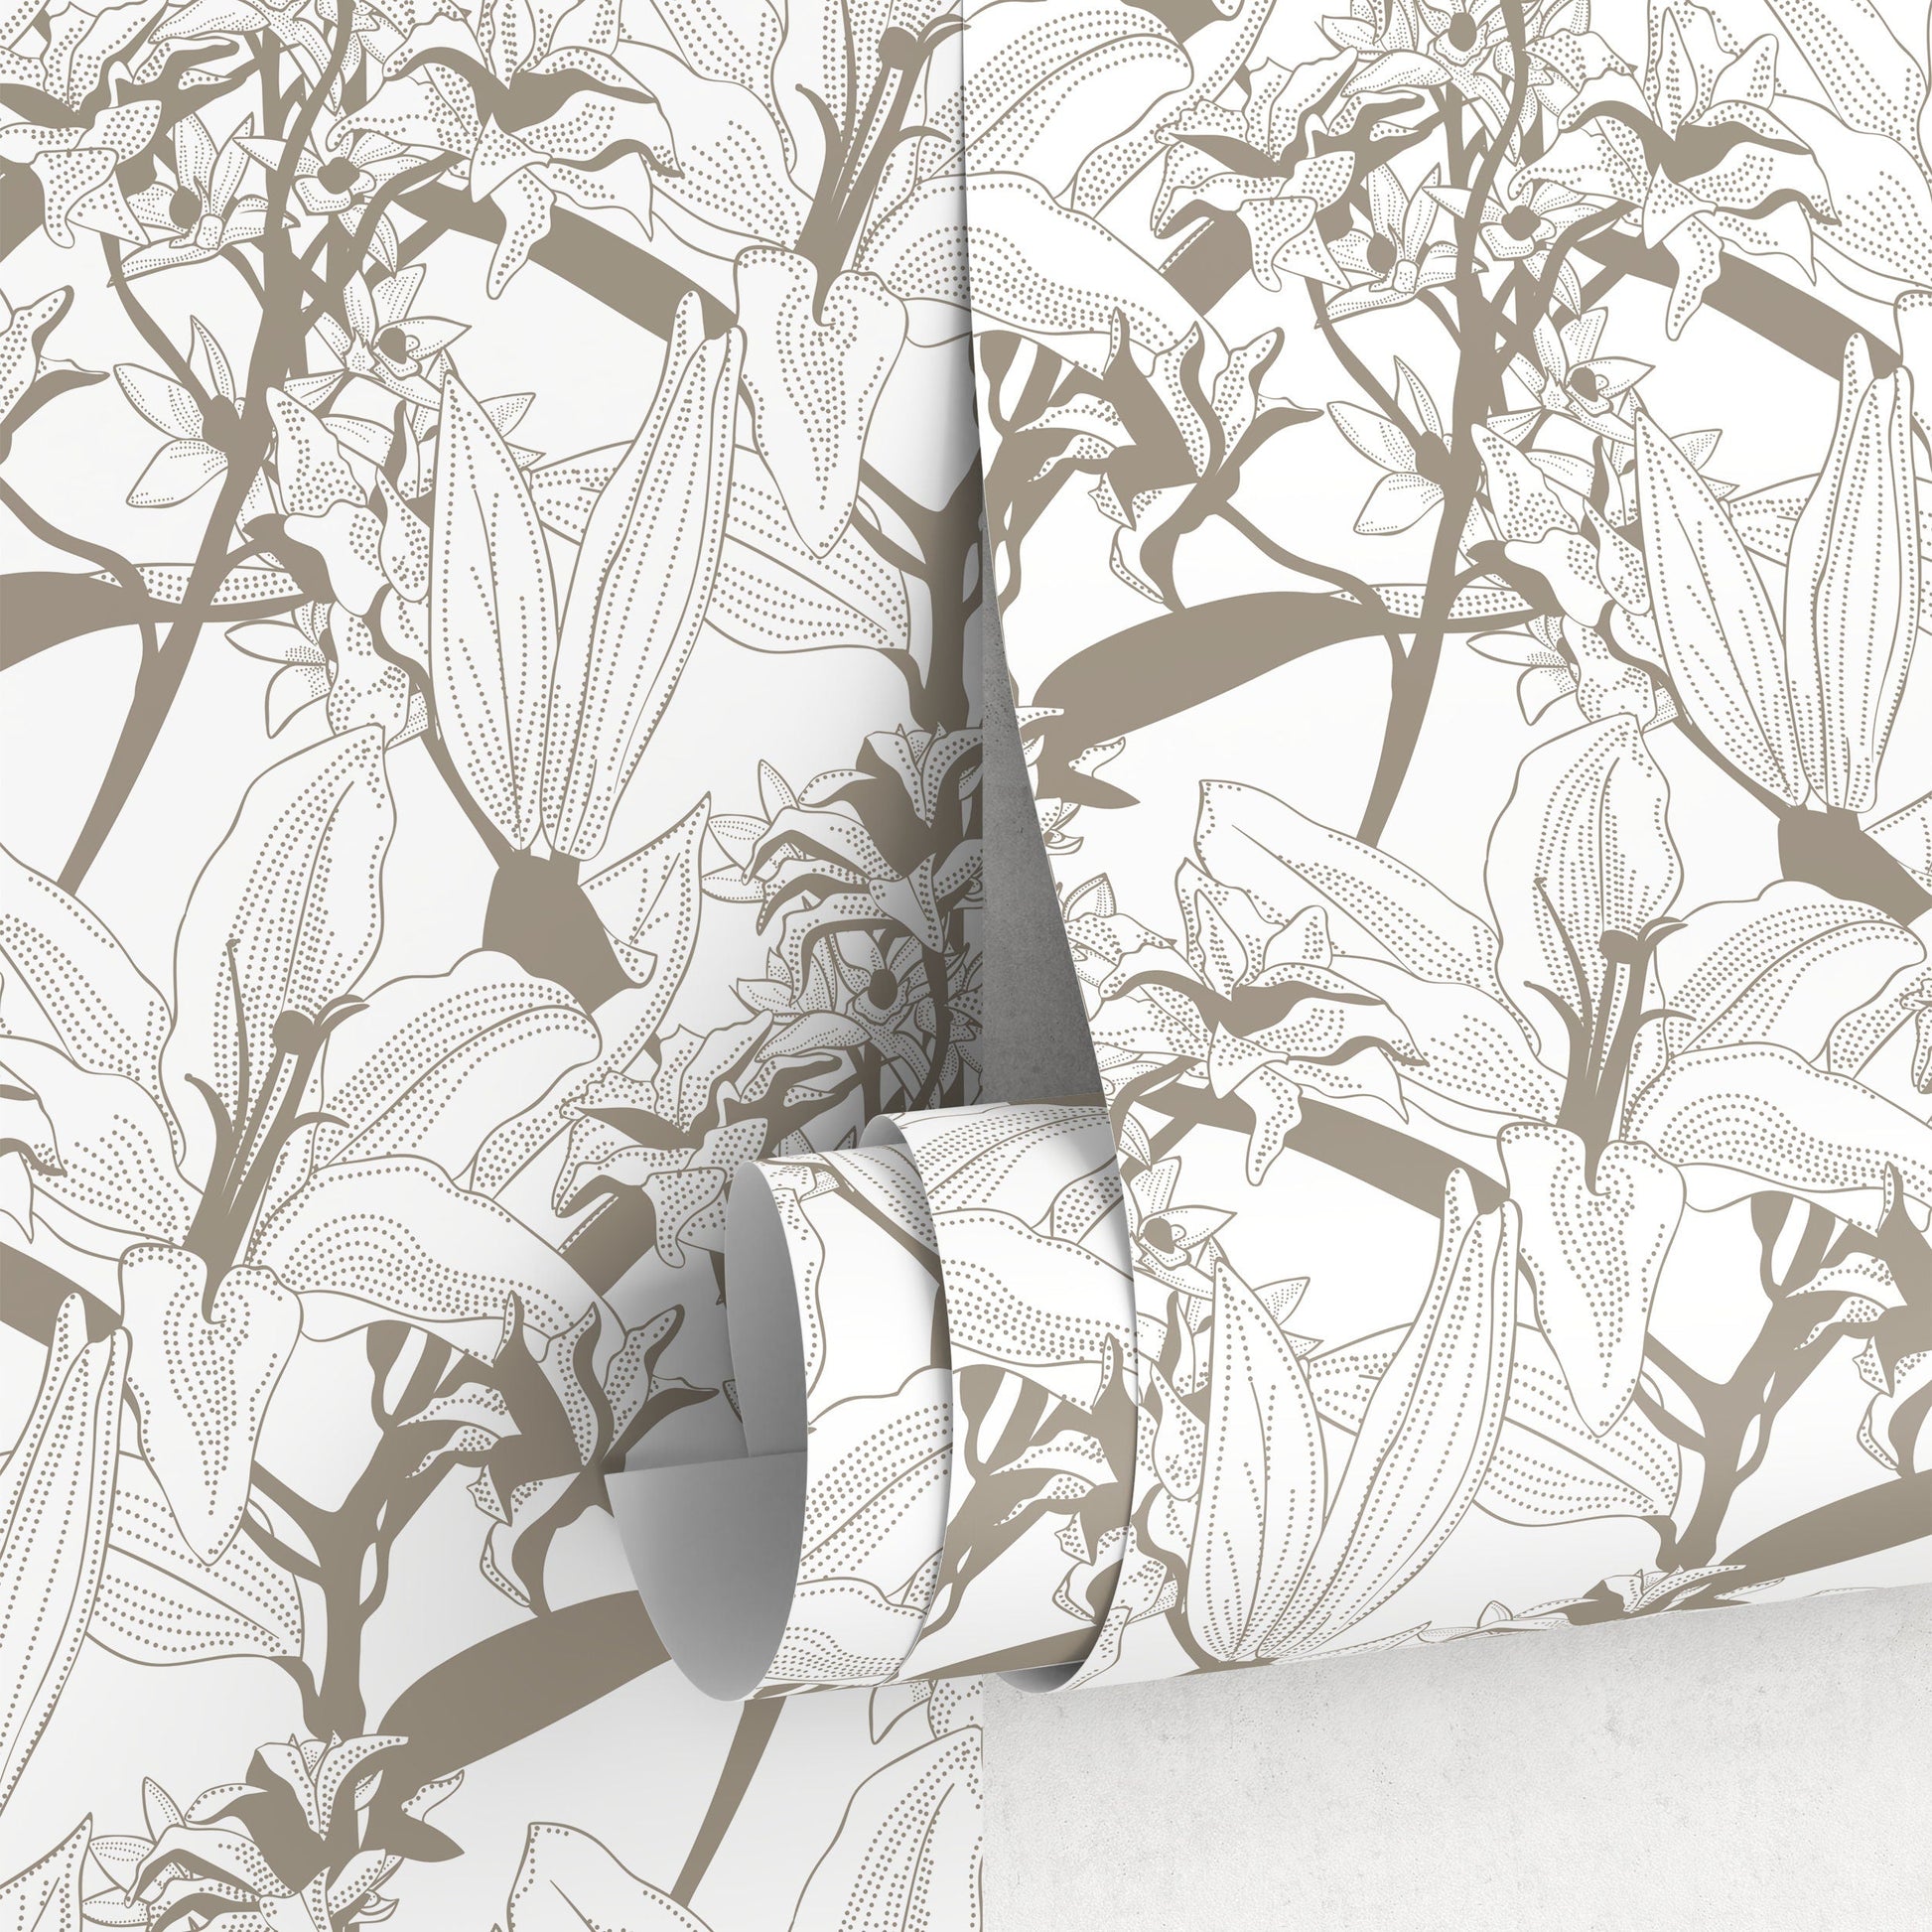 Brown Lily Floral Wallpaper / Wallpaper Peel and Stick Wallpaper Removable Wallpaper Home Decor Wall Art Wall Decor Room Decor - C777